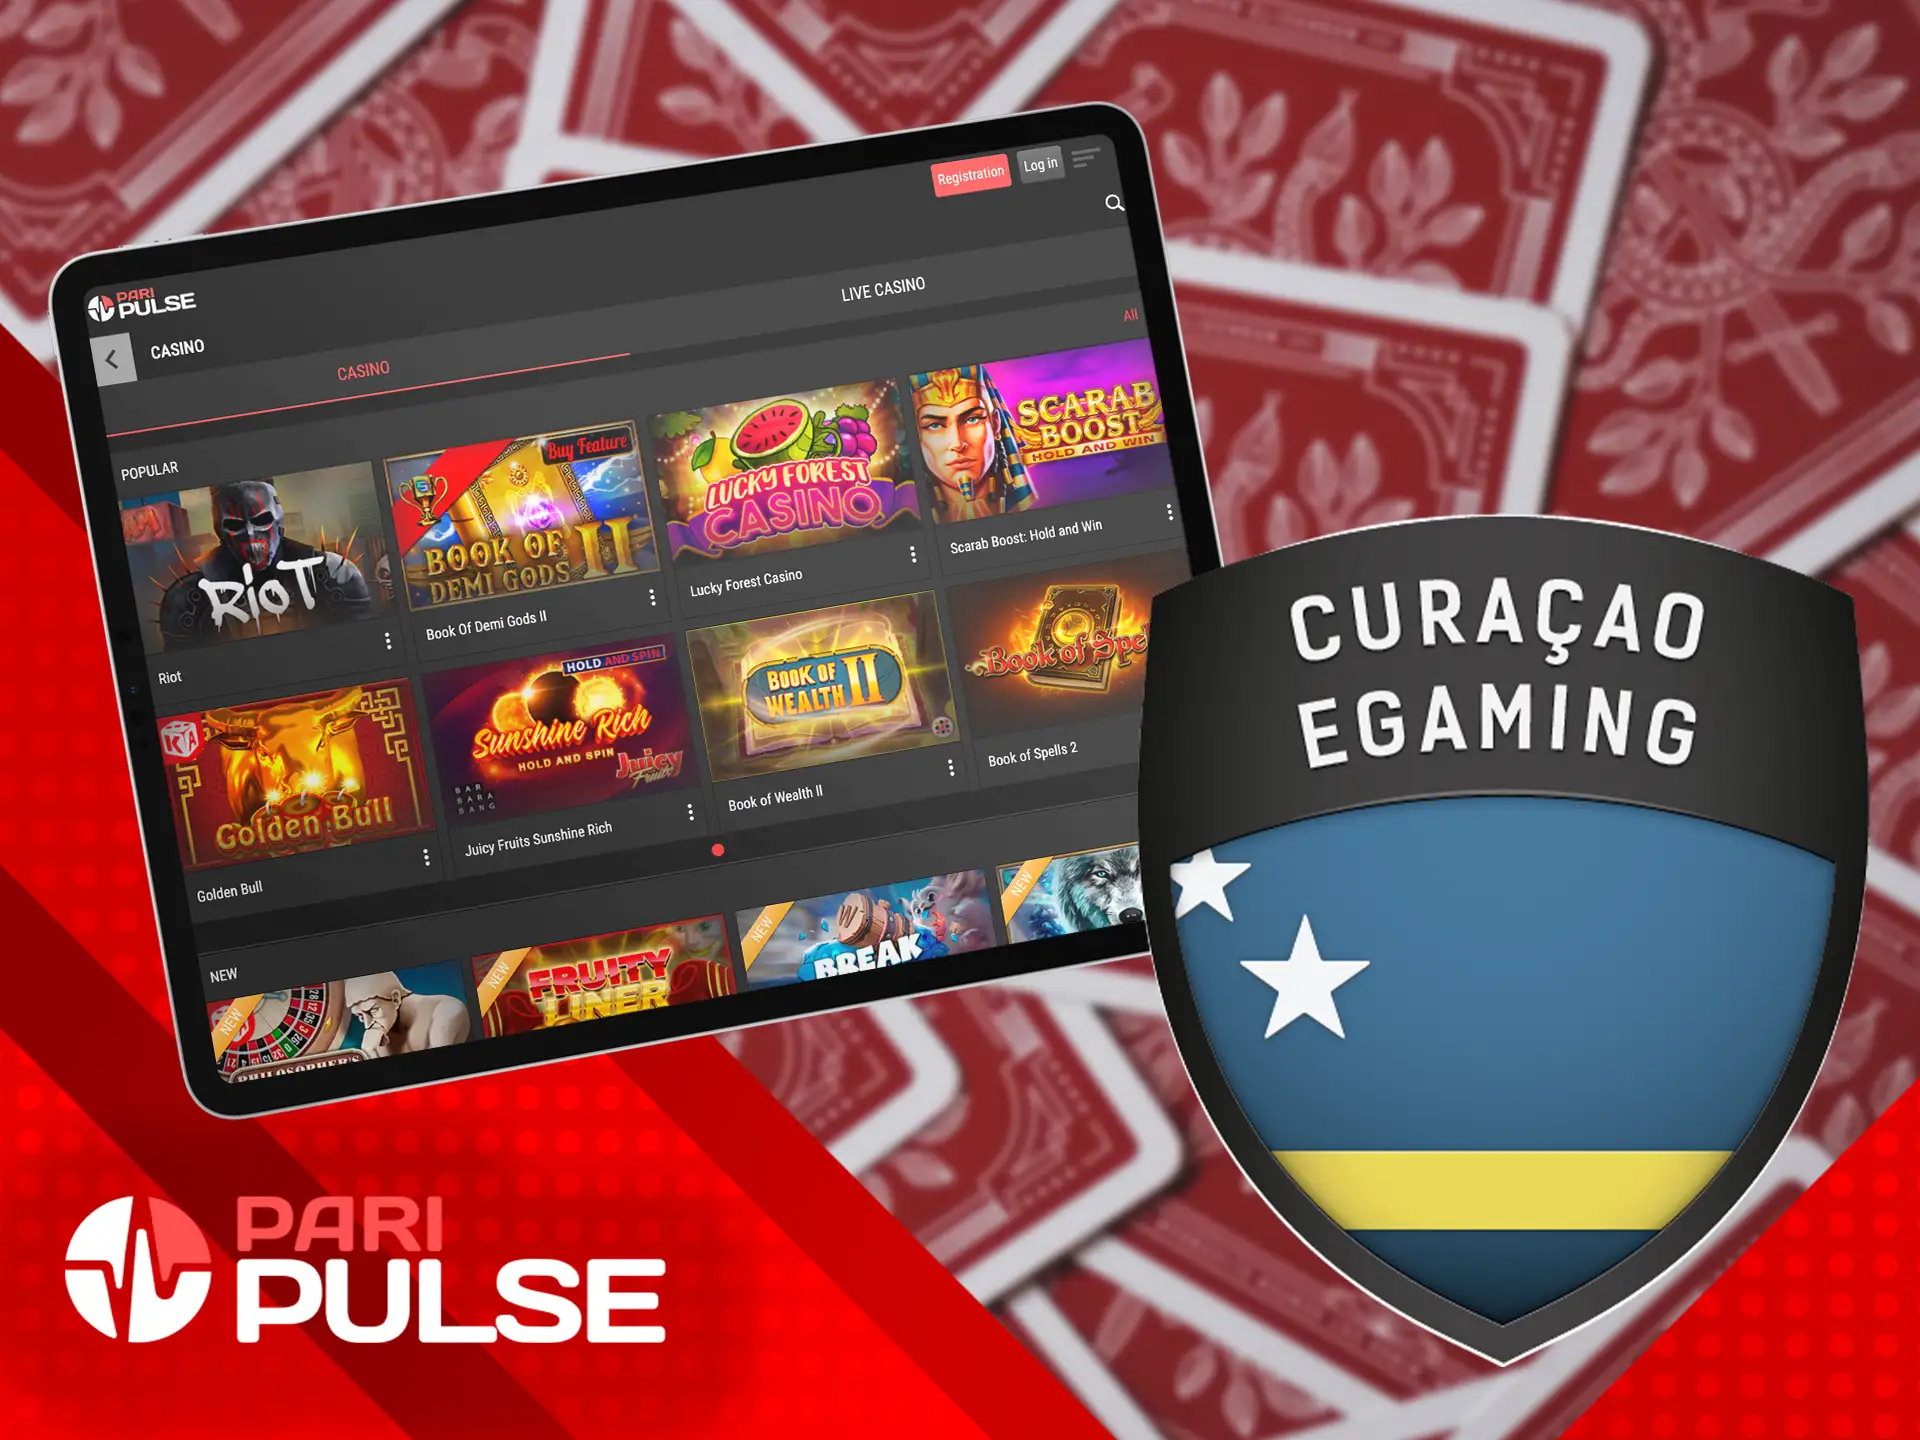 PariPulse is a world renowned bookmaker operating legally, licensed by the Curacao E-Gaming Commission.